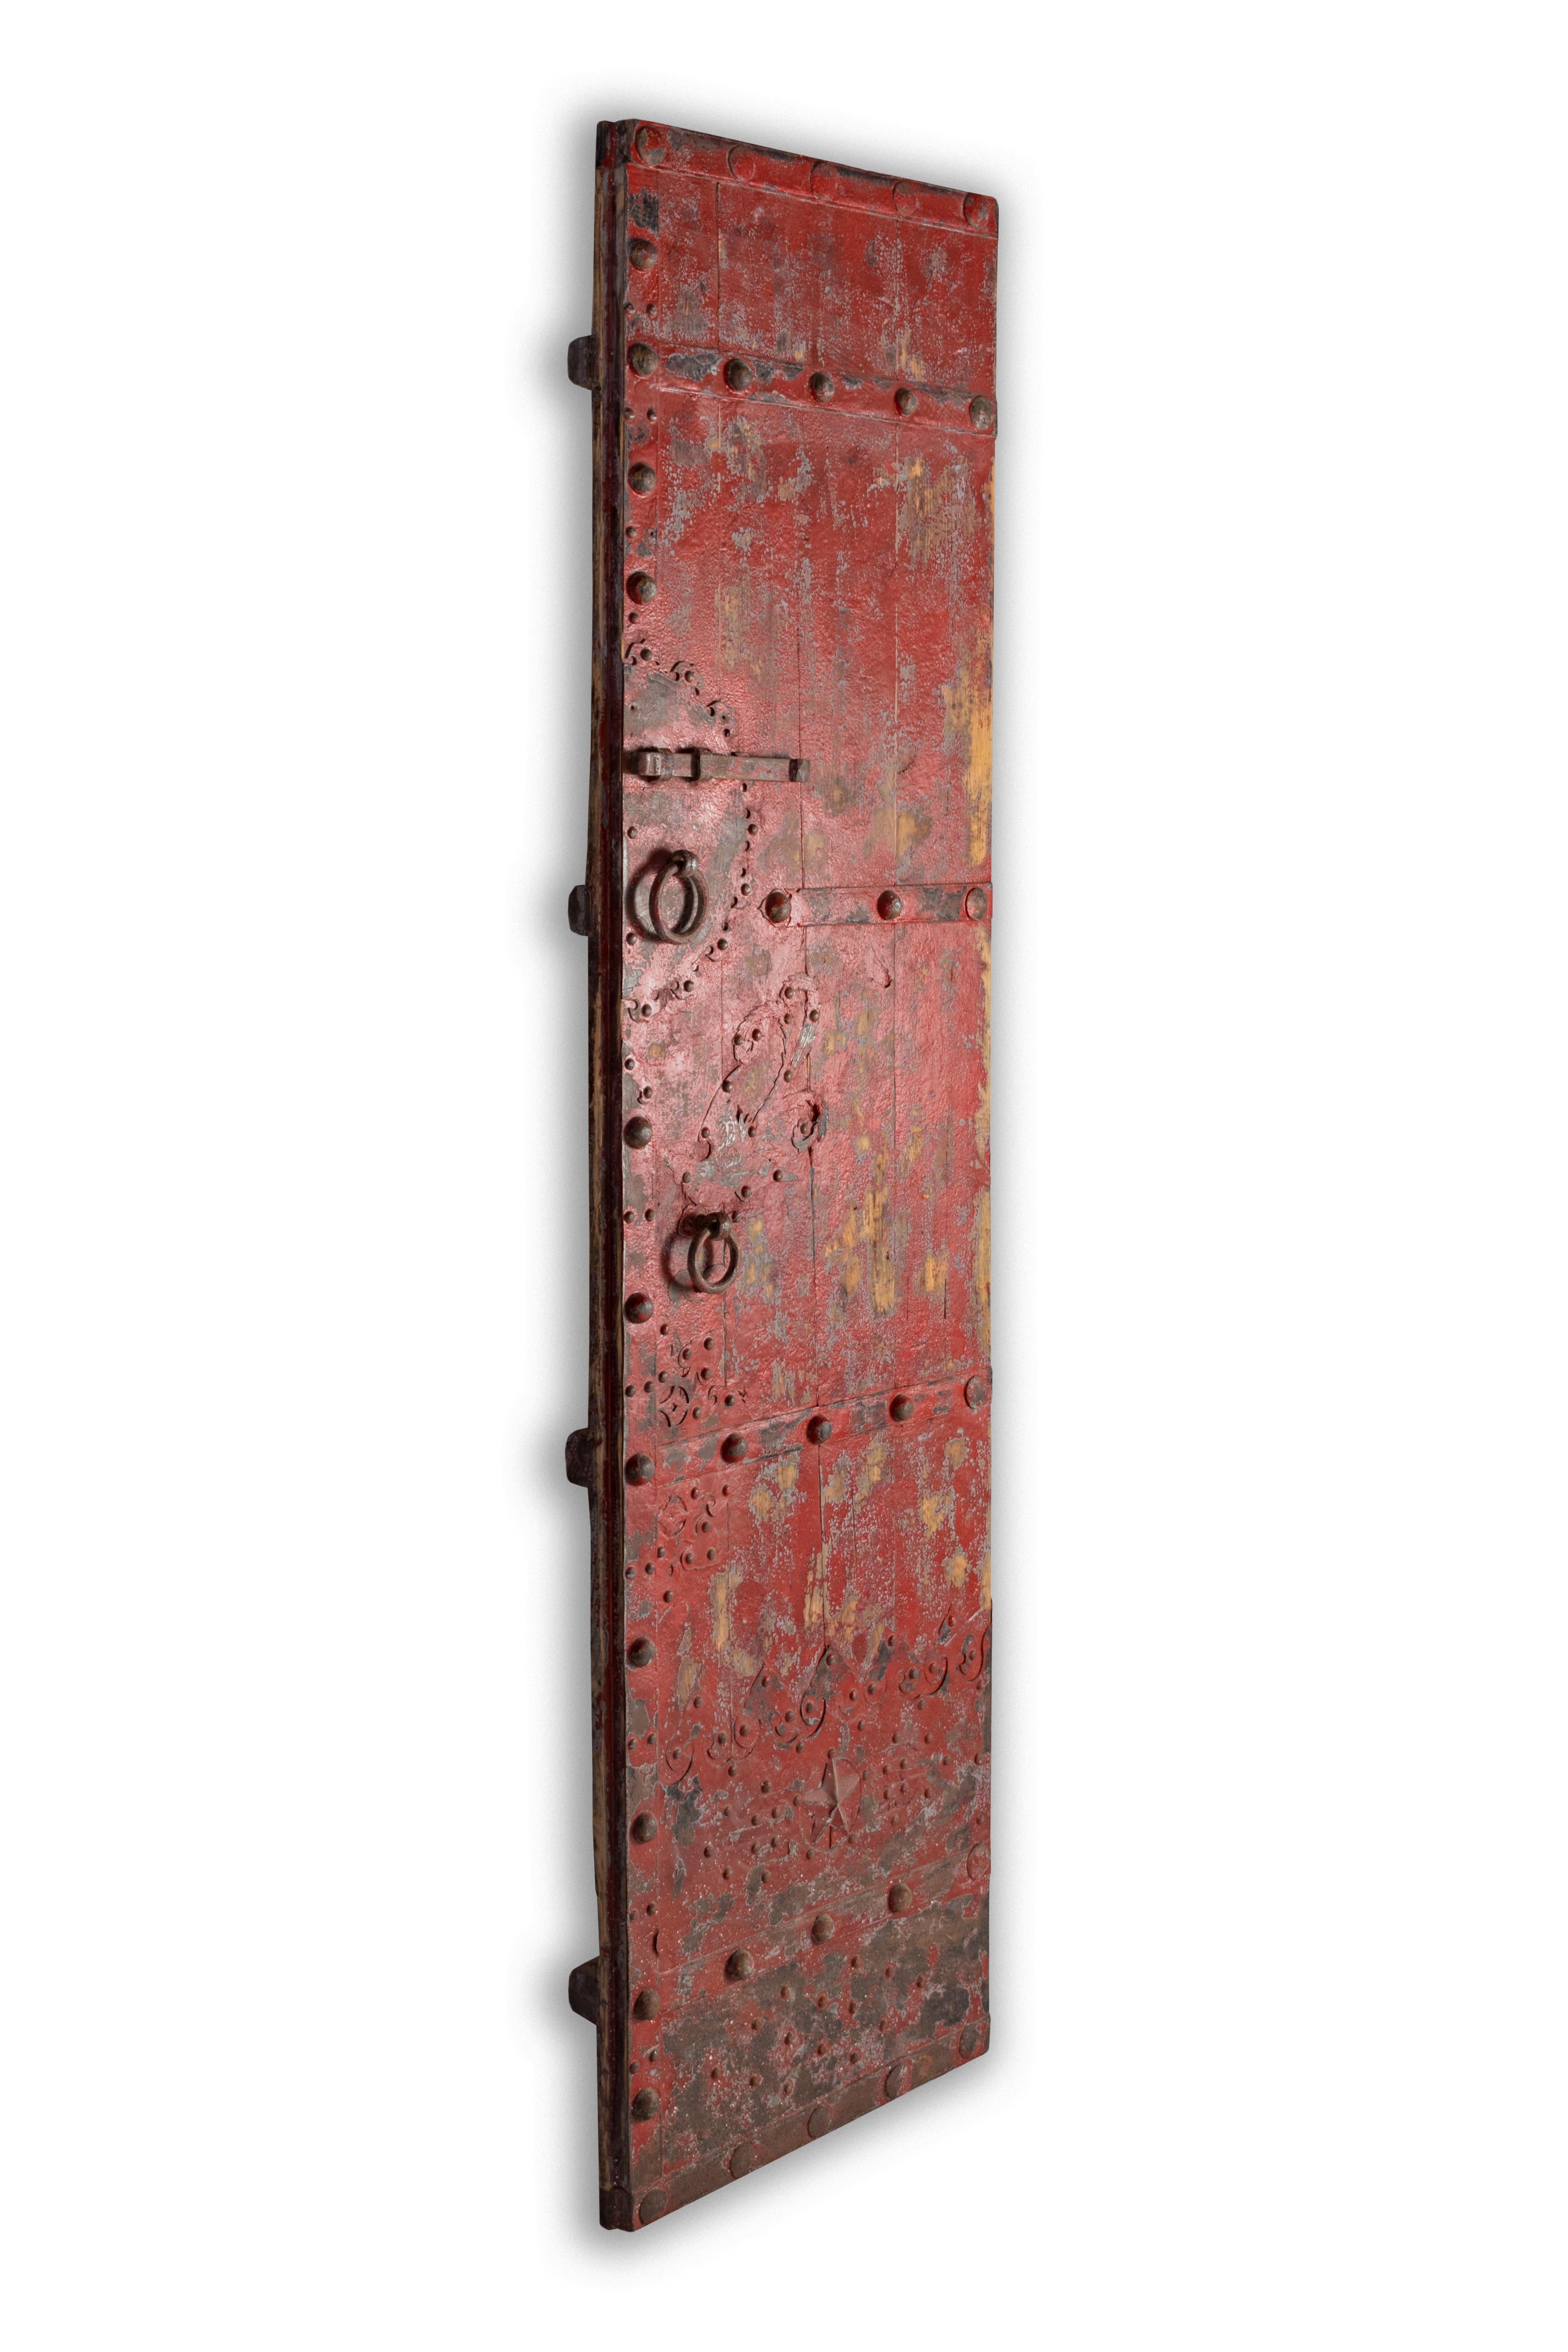 Pair of red patina South Asian doors repurposed as wall decor.

Piece from our one-of-a-kind collection, Le Monde. Exclusive to Brendan Bass. 


Globally curated by Brendan Bass, Le Monde furniture and accessories offer modern sensibility,